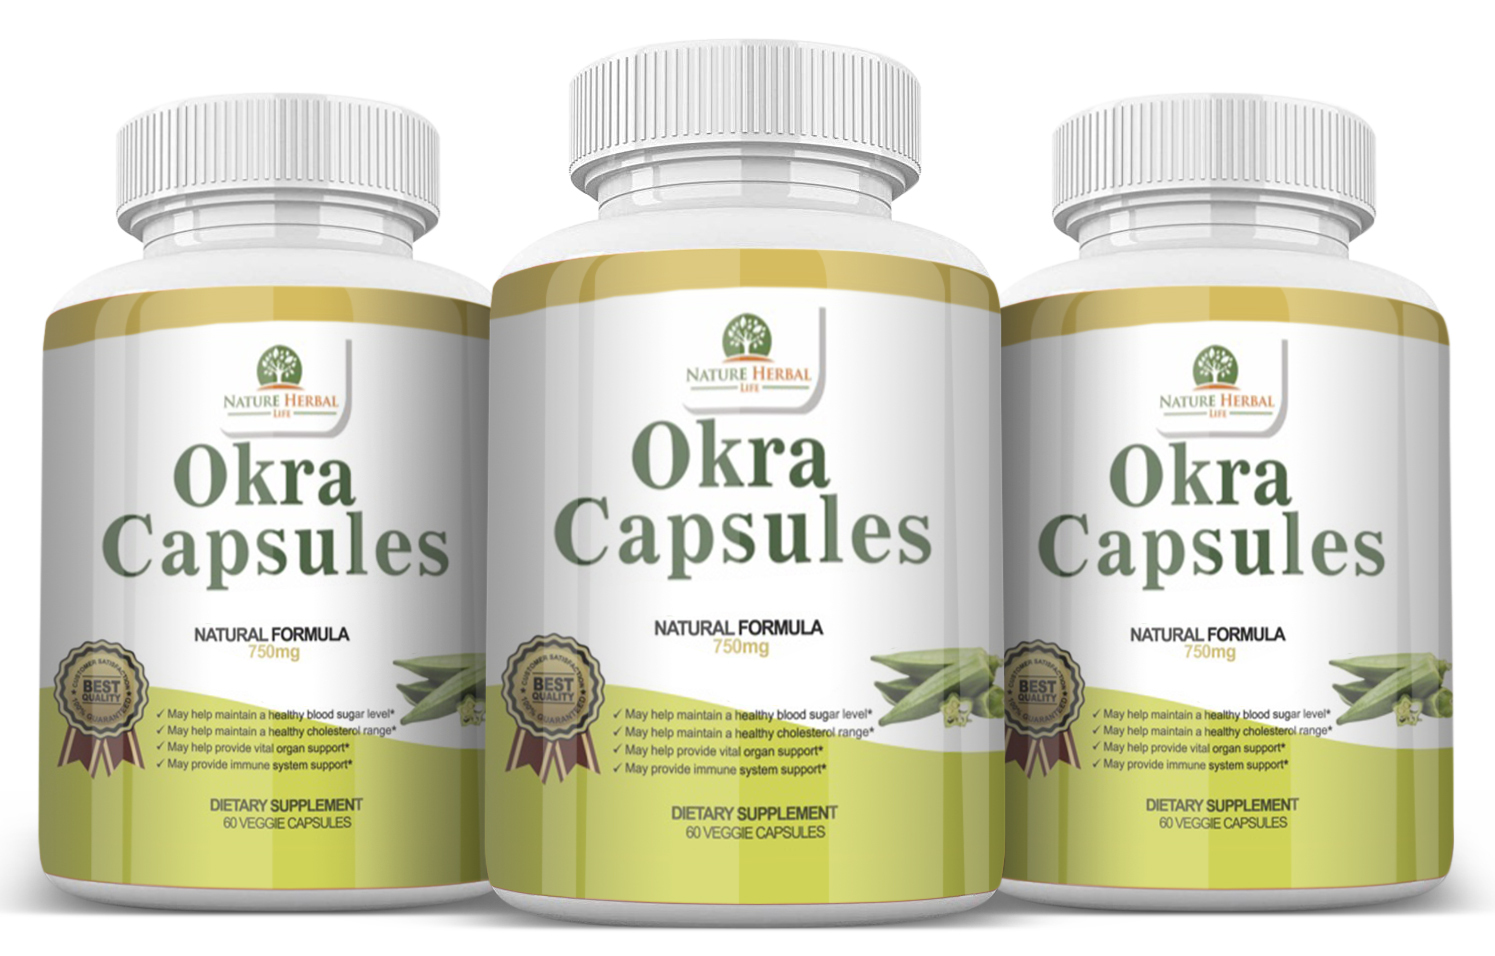 Okra Capsules. Blood Sugar Support Supplements. 3 Bottles (750mg) 60 Capsules